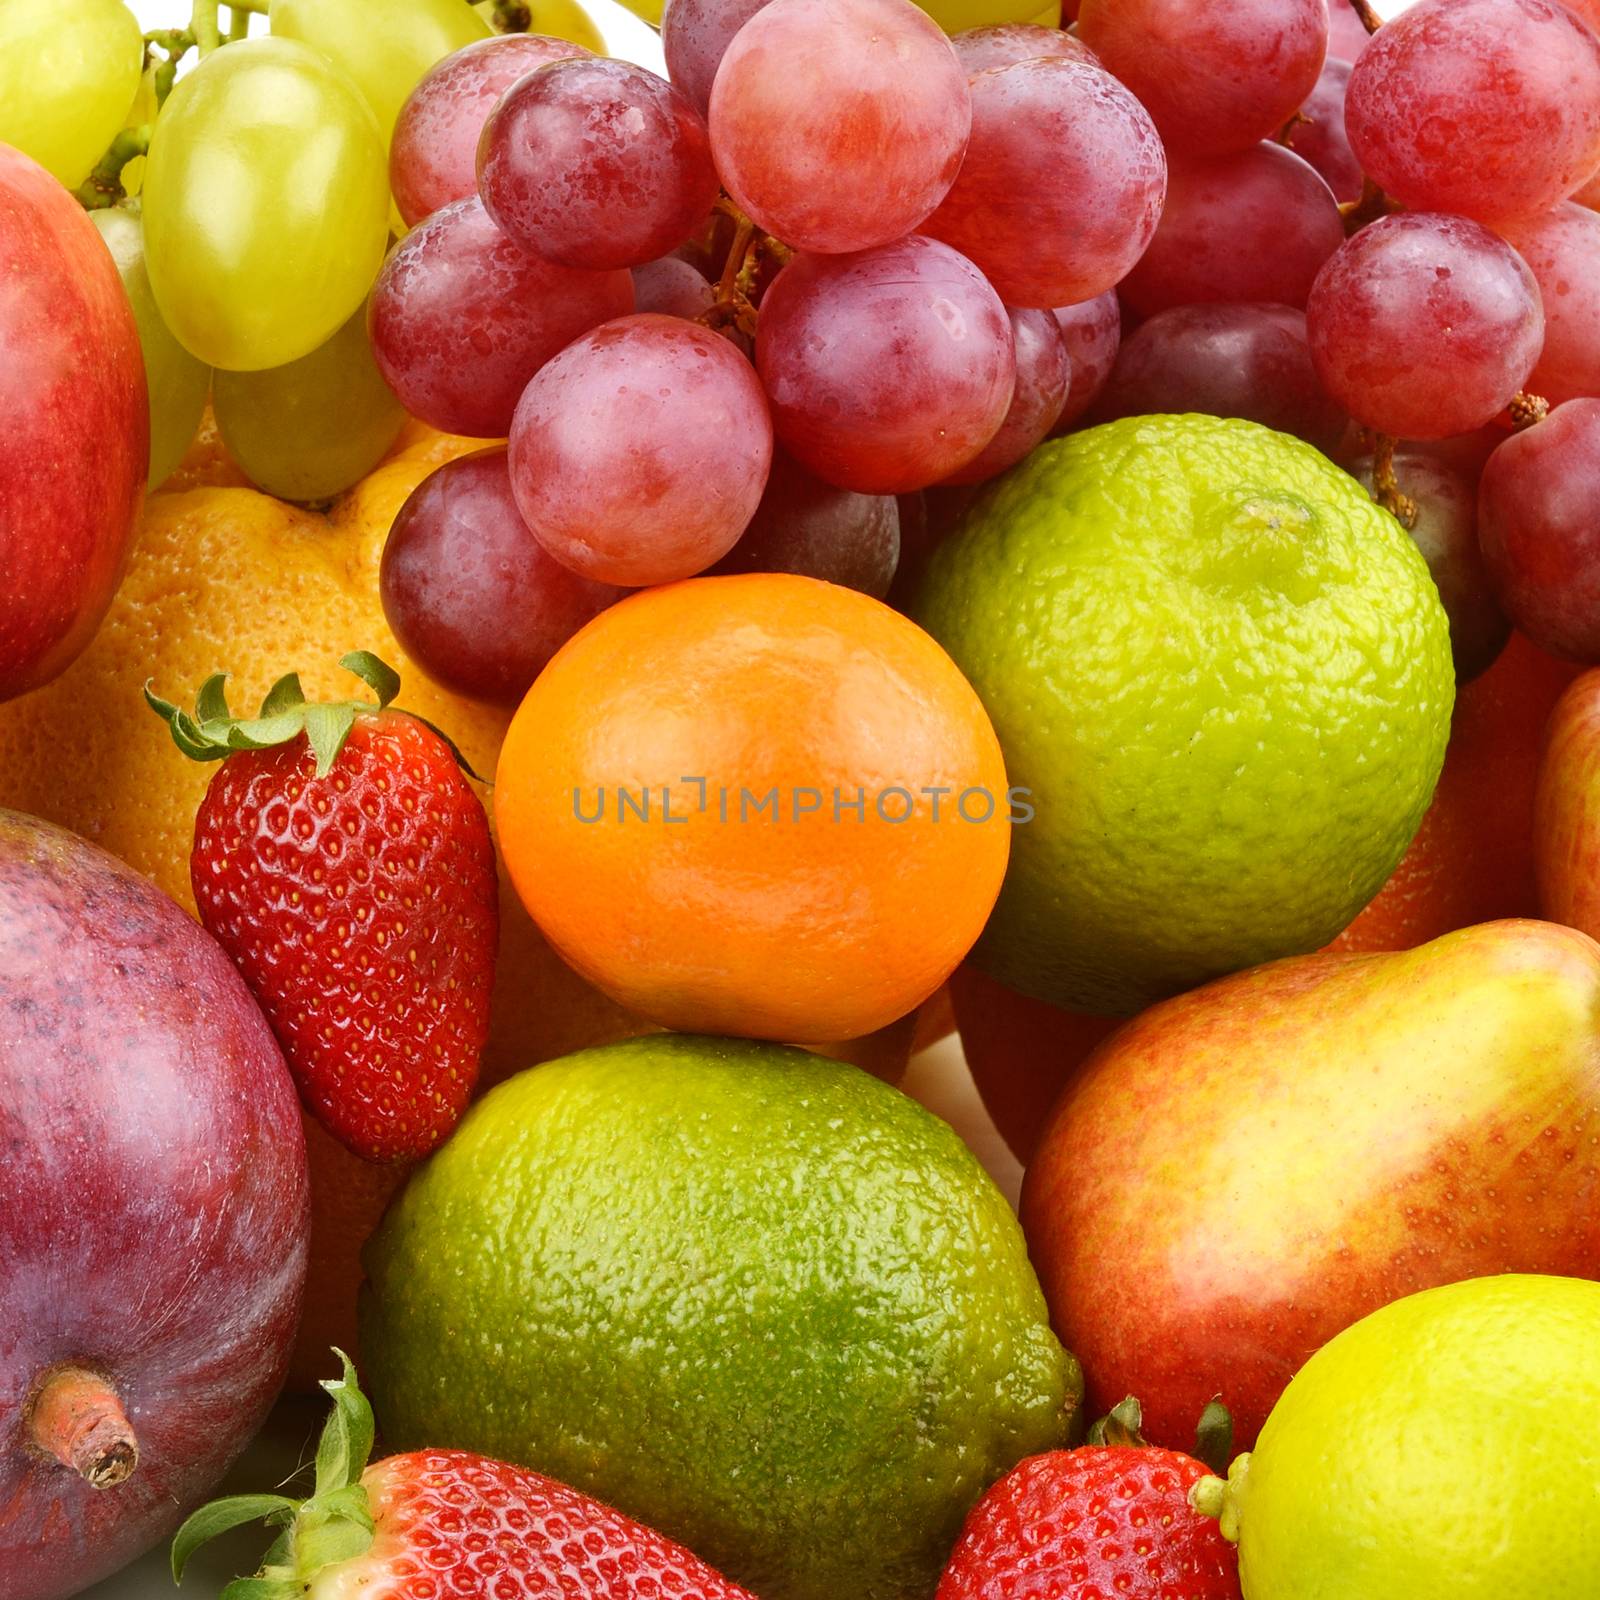 Multicolored background of fruits and berries